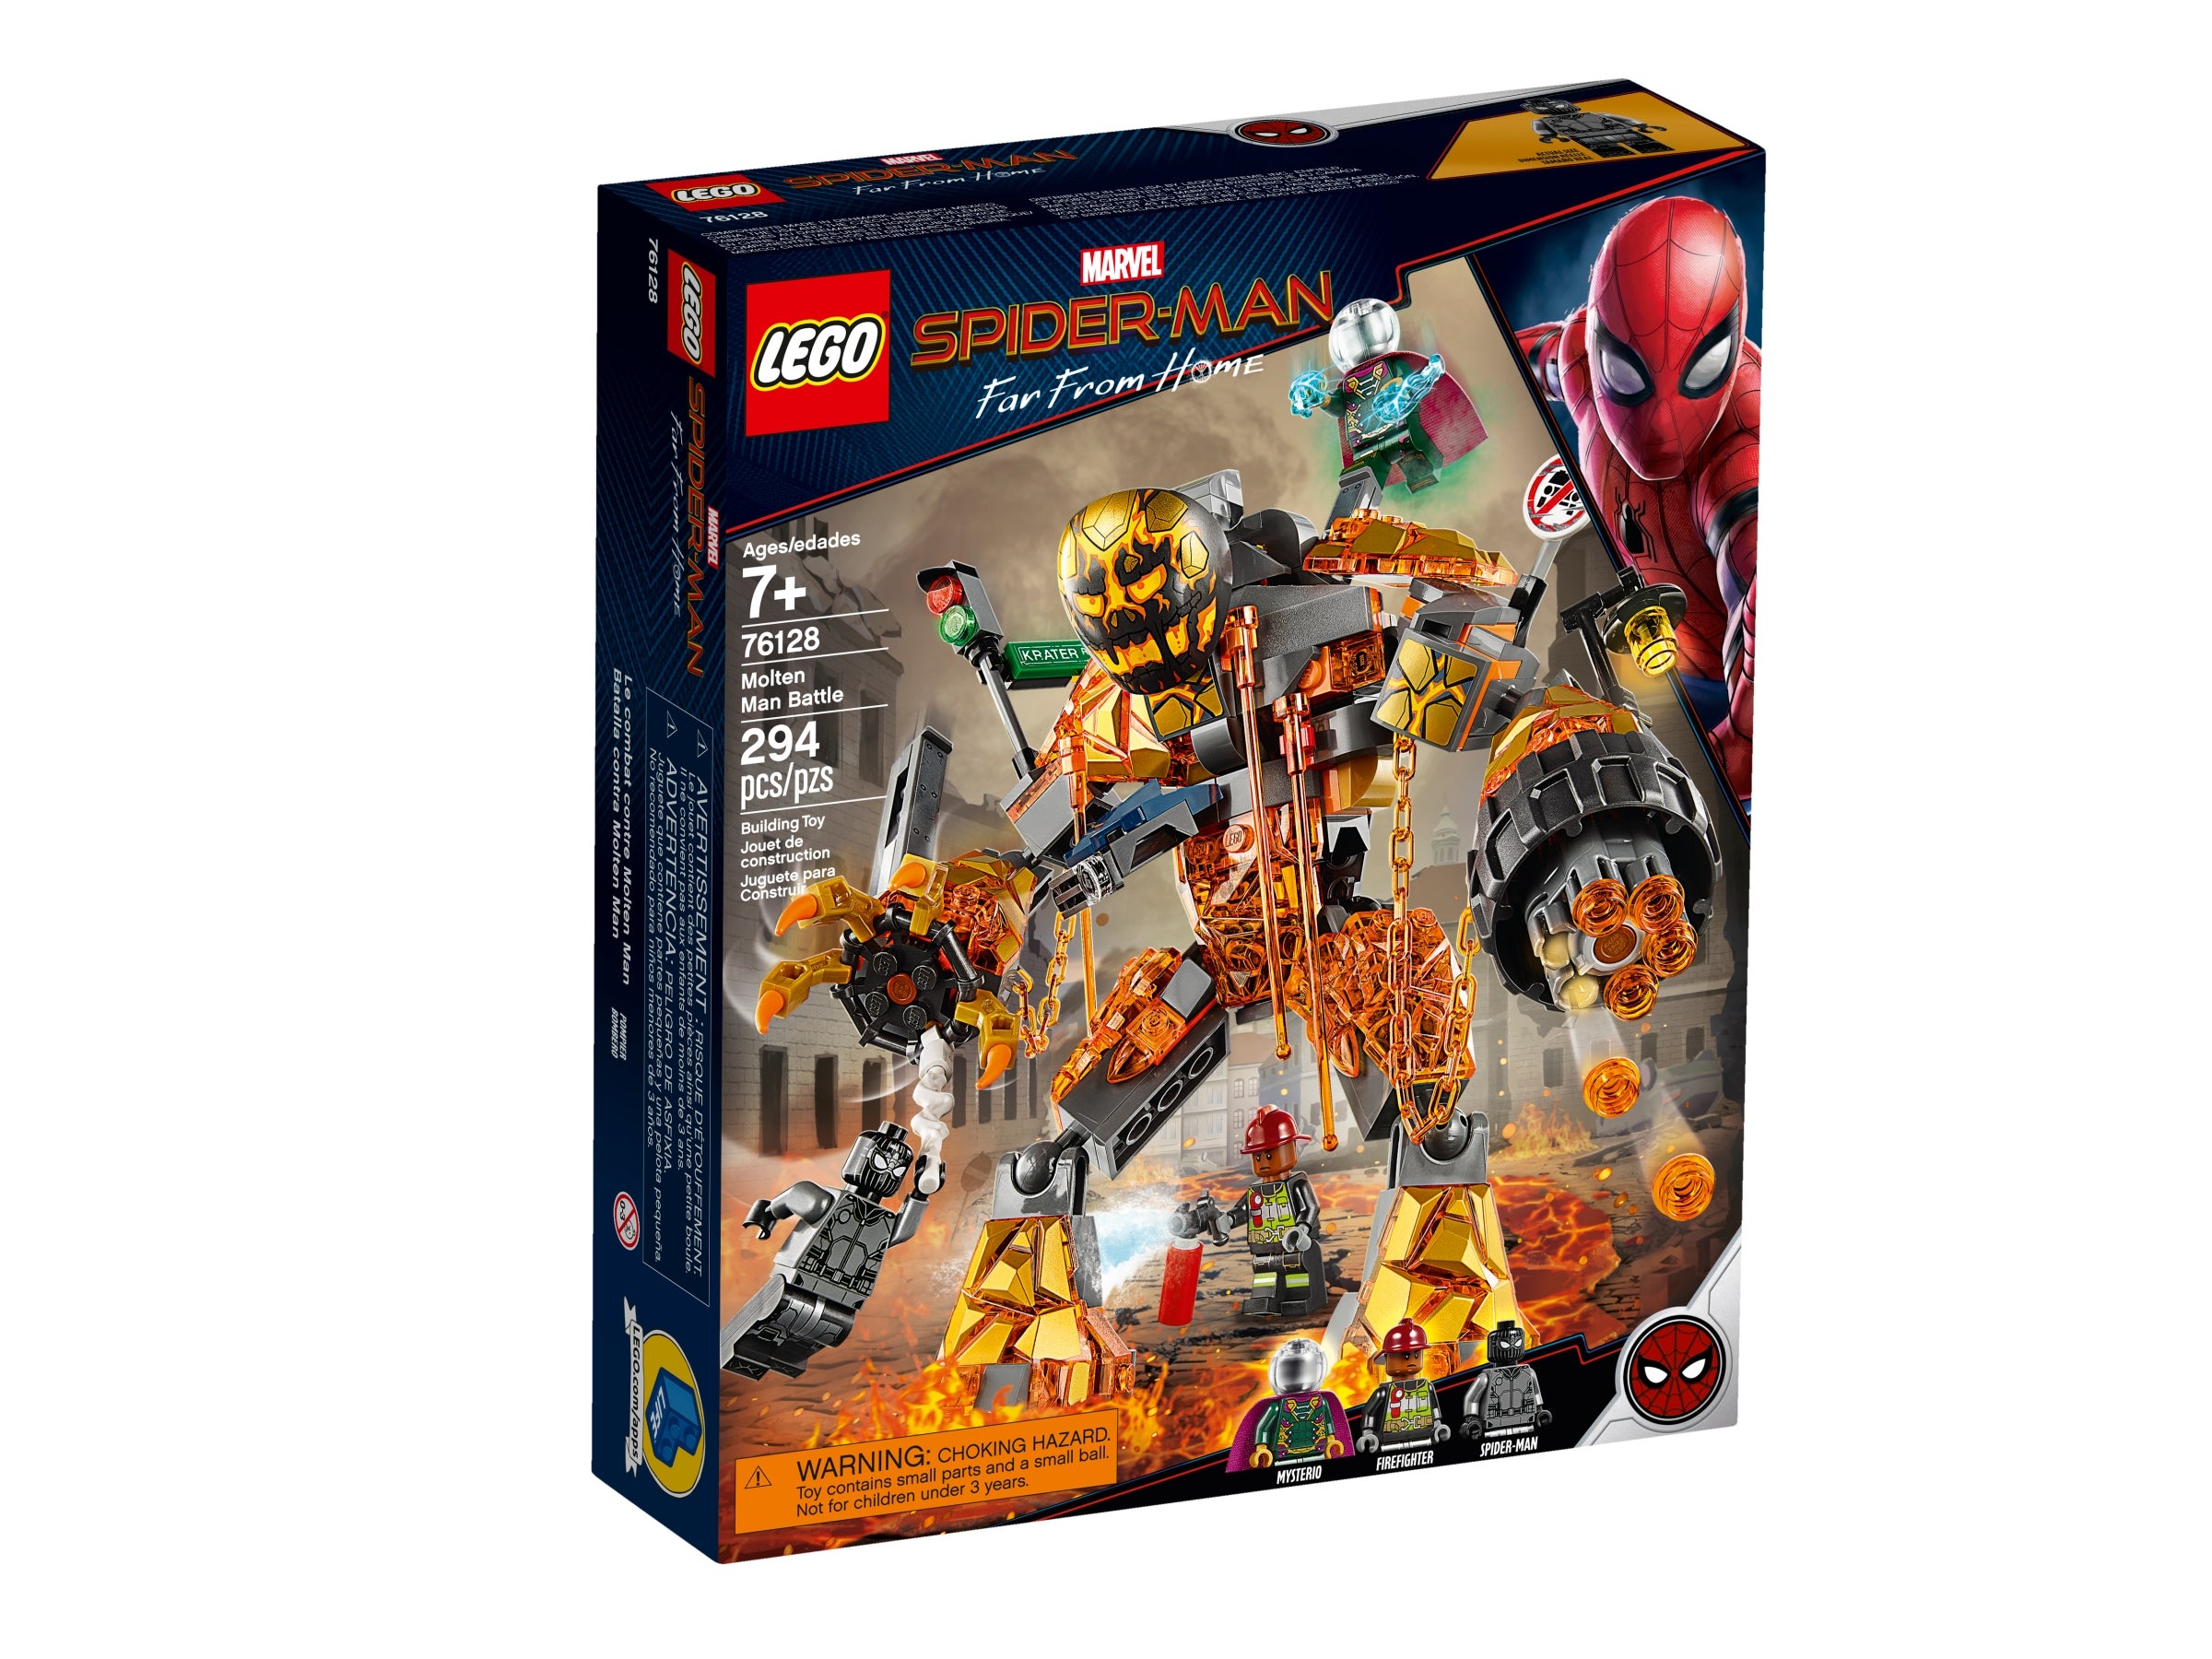 LEGO Marvel Far from Home Fire Man Figure from set 76128 NEUF